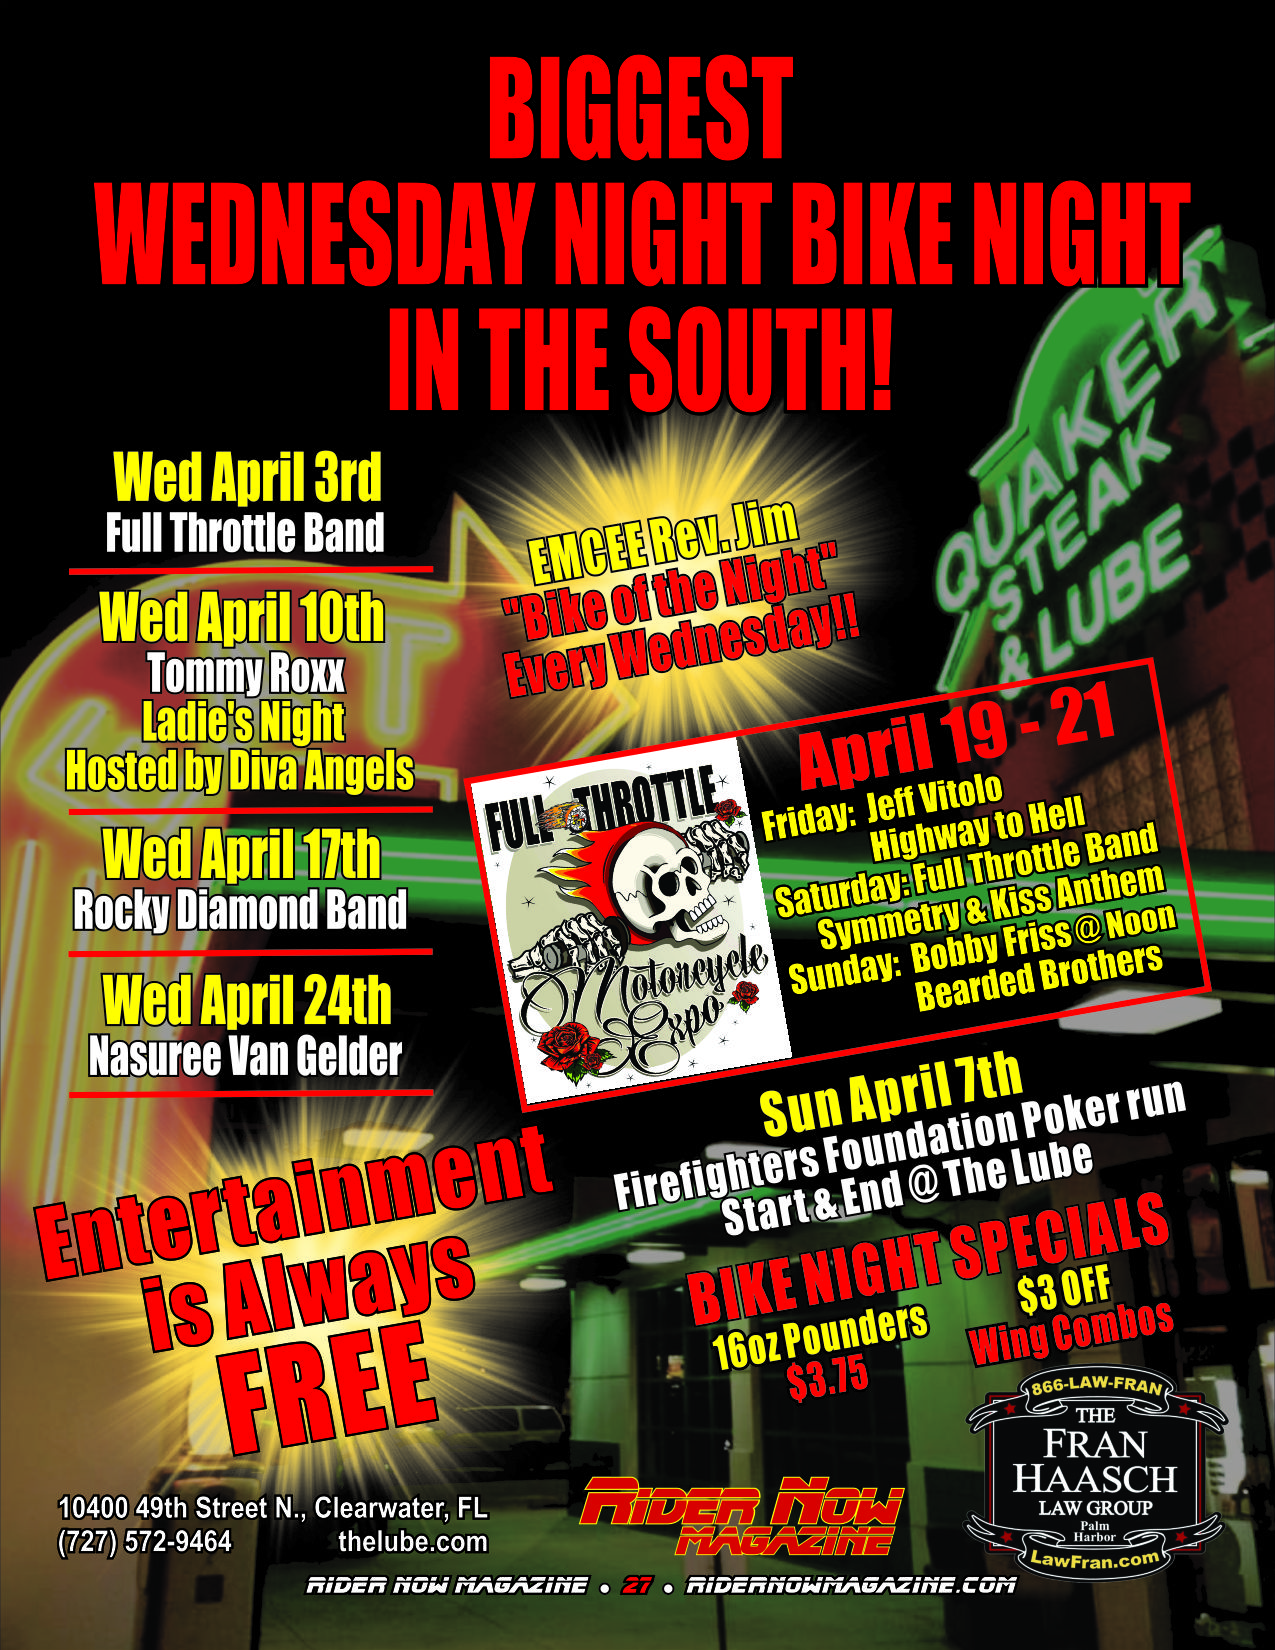 QSL Wednesday Bike Nights for April